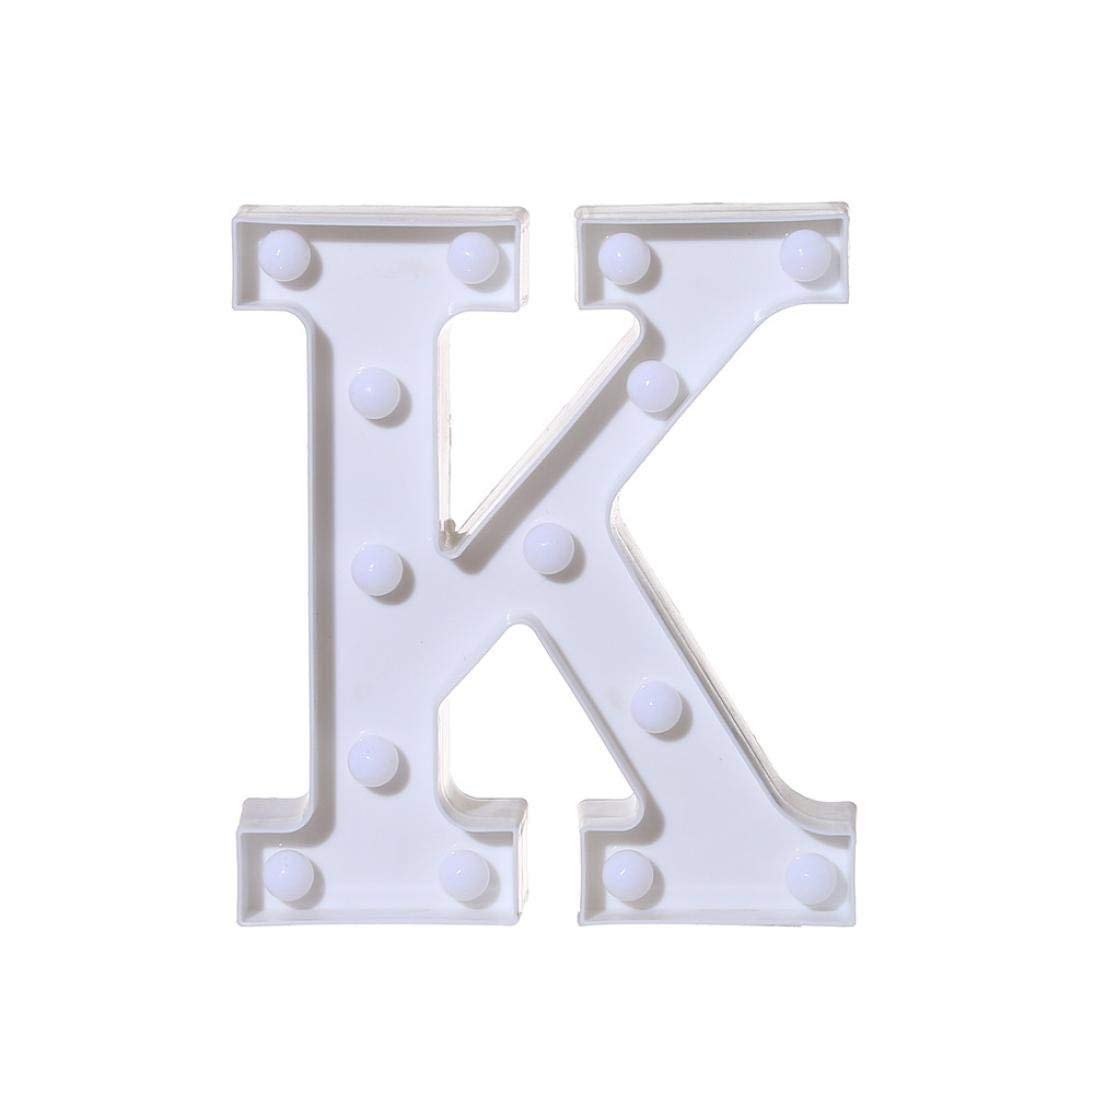 Alphabet K LED Marquee Light Sign for Birthday Party Family Wedding Decor Walls Hanging